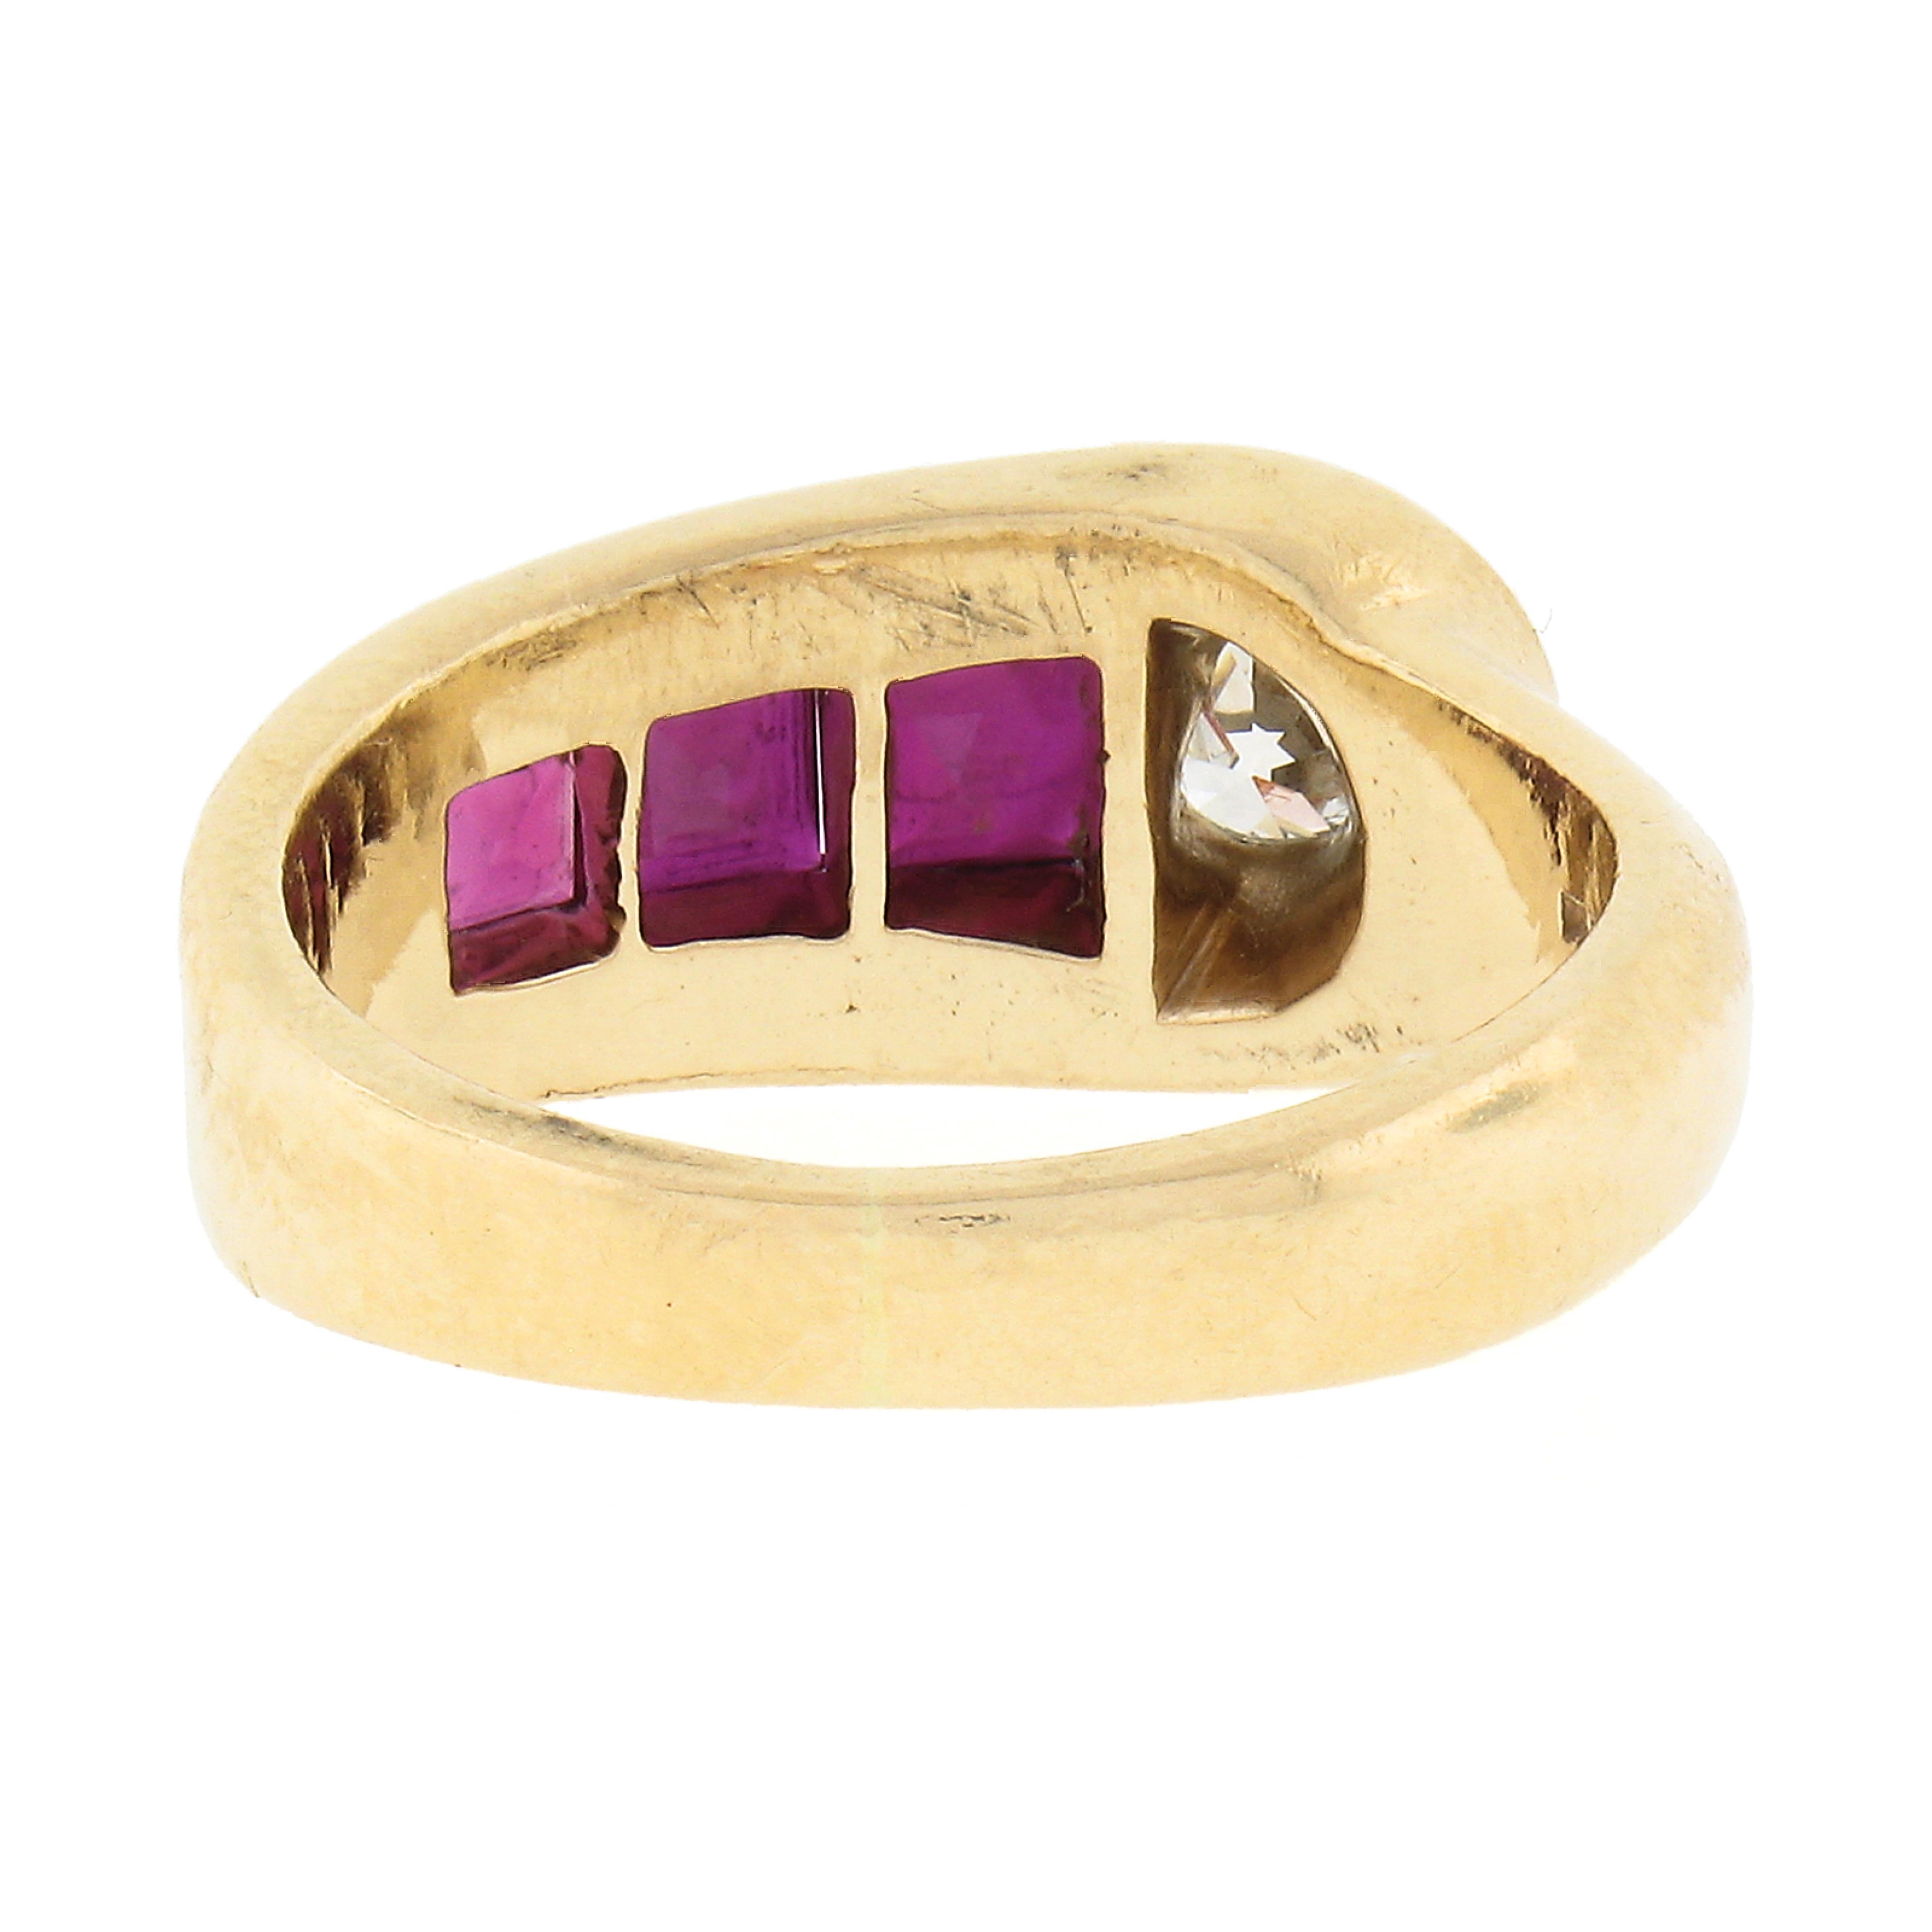 Maurice Tishman Retro 14k Gold & Platinum Diamond & Ruby Buckle Style Band Ring For Sale 3